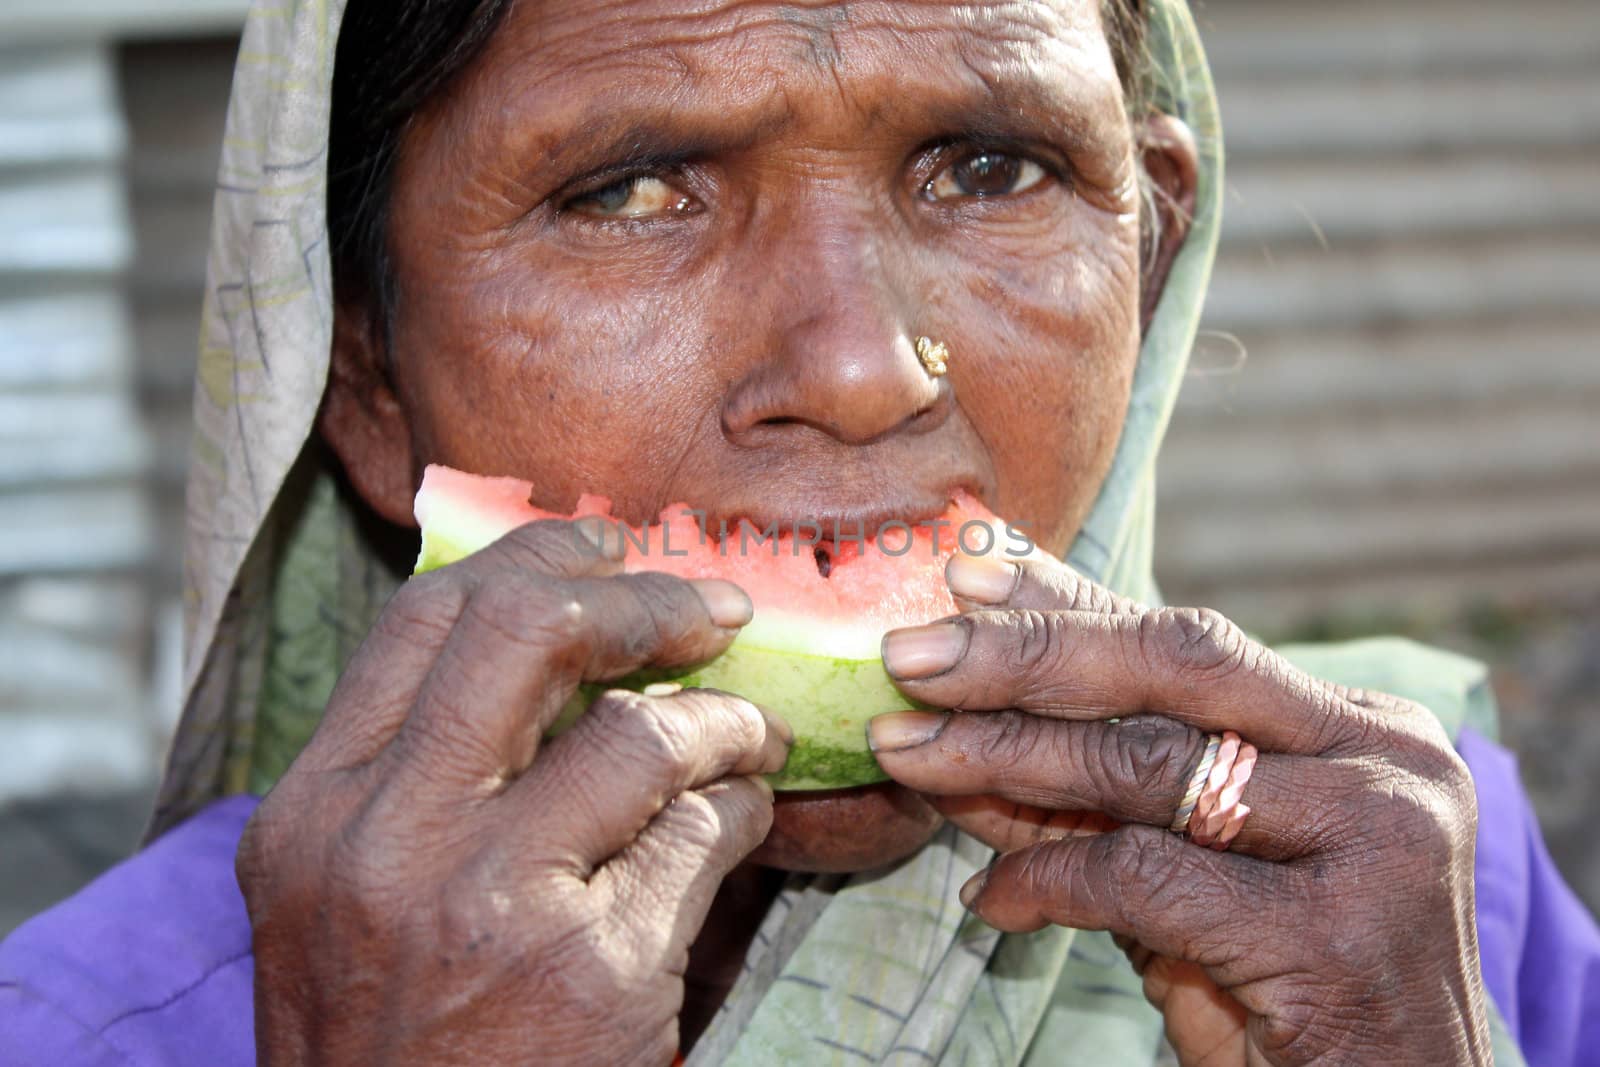 A very poor & hungry Indian woman eating a watermelon. Focus is on the hand and melon.